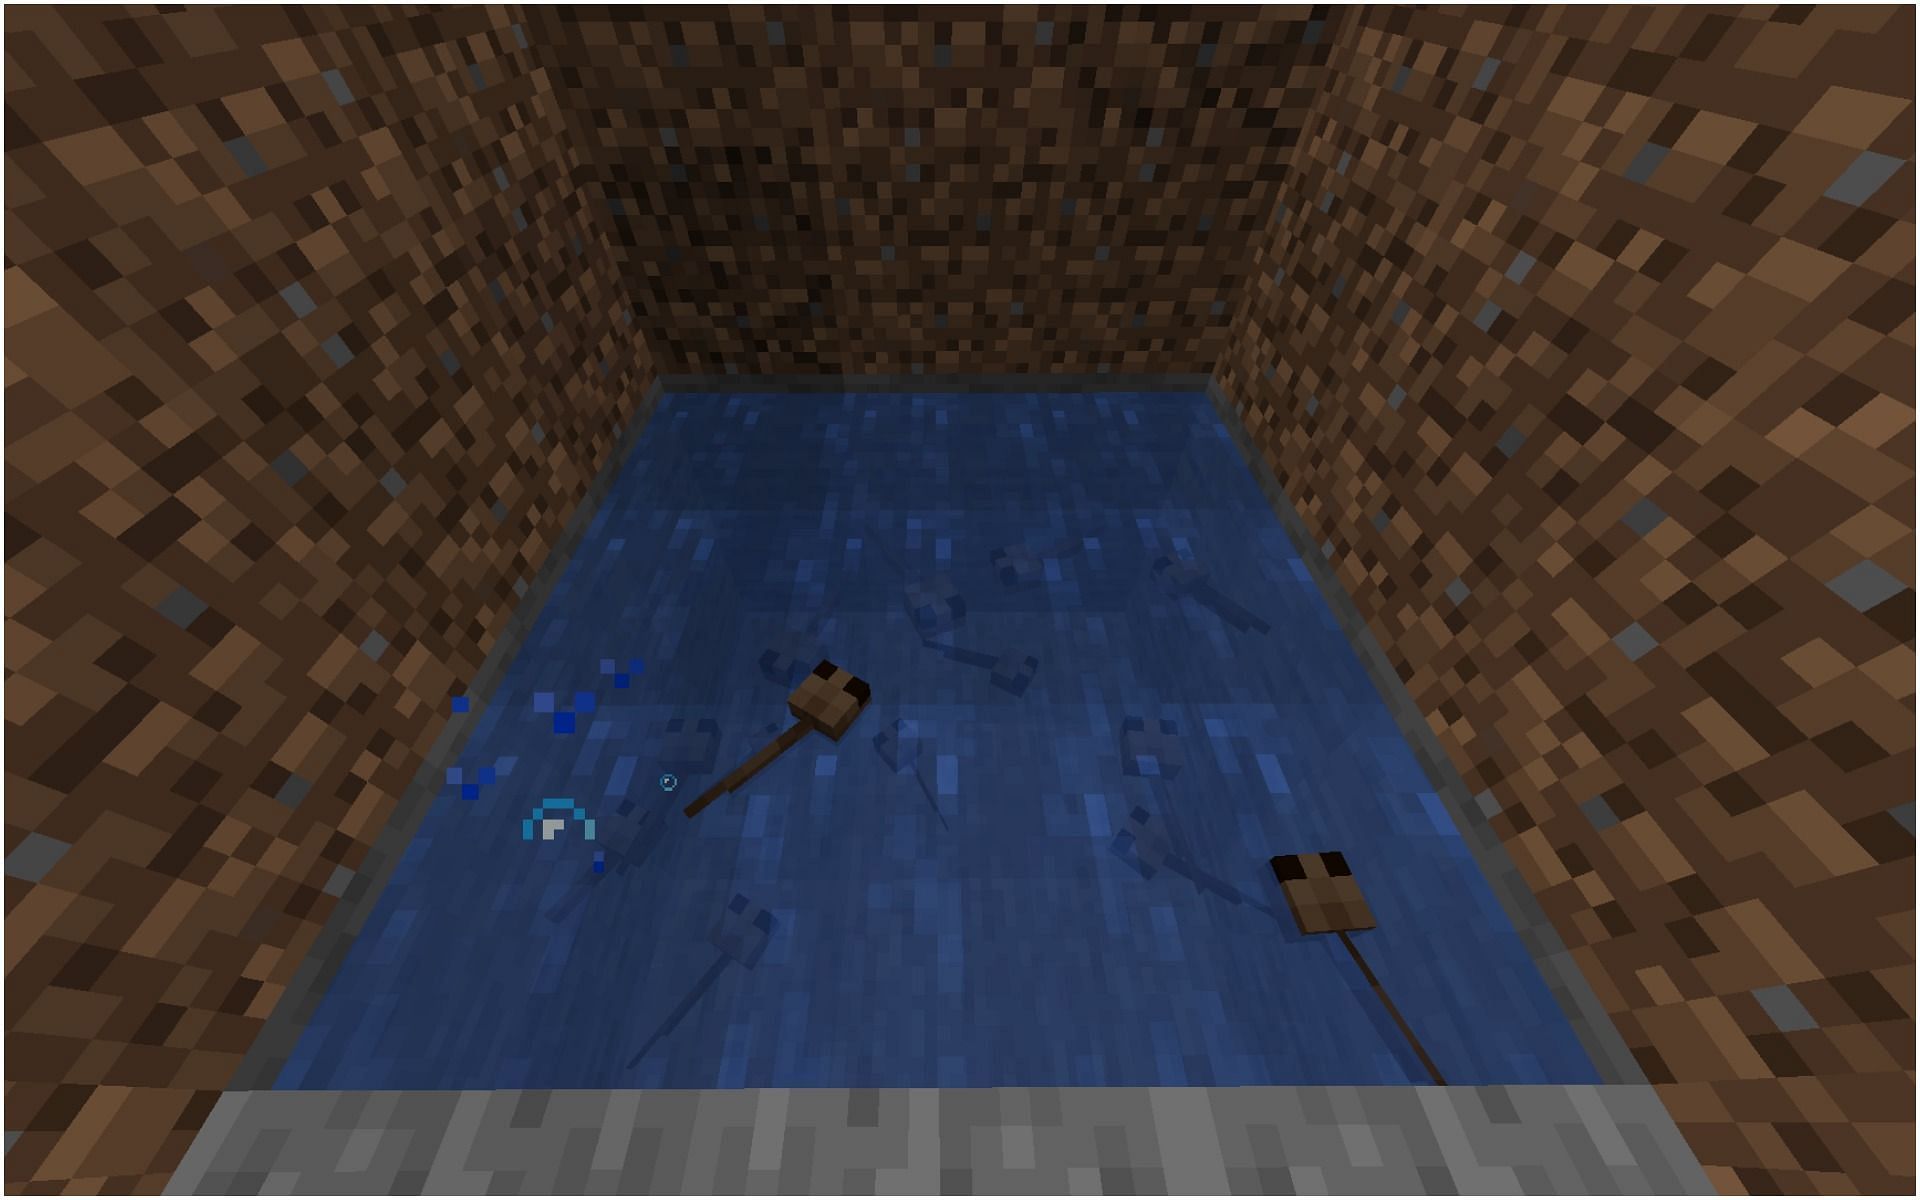 What do tadpoles eat in the Minecraft 1.19 update?